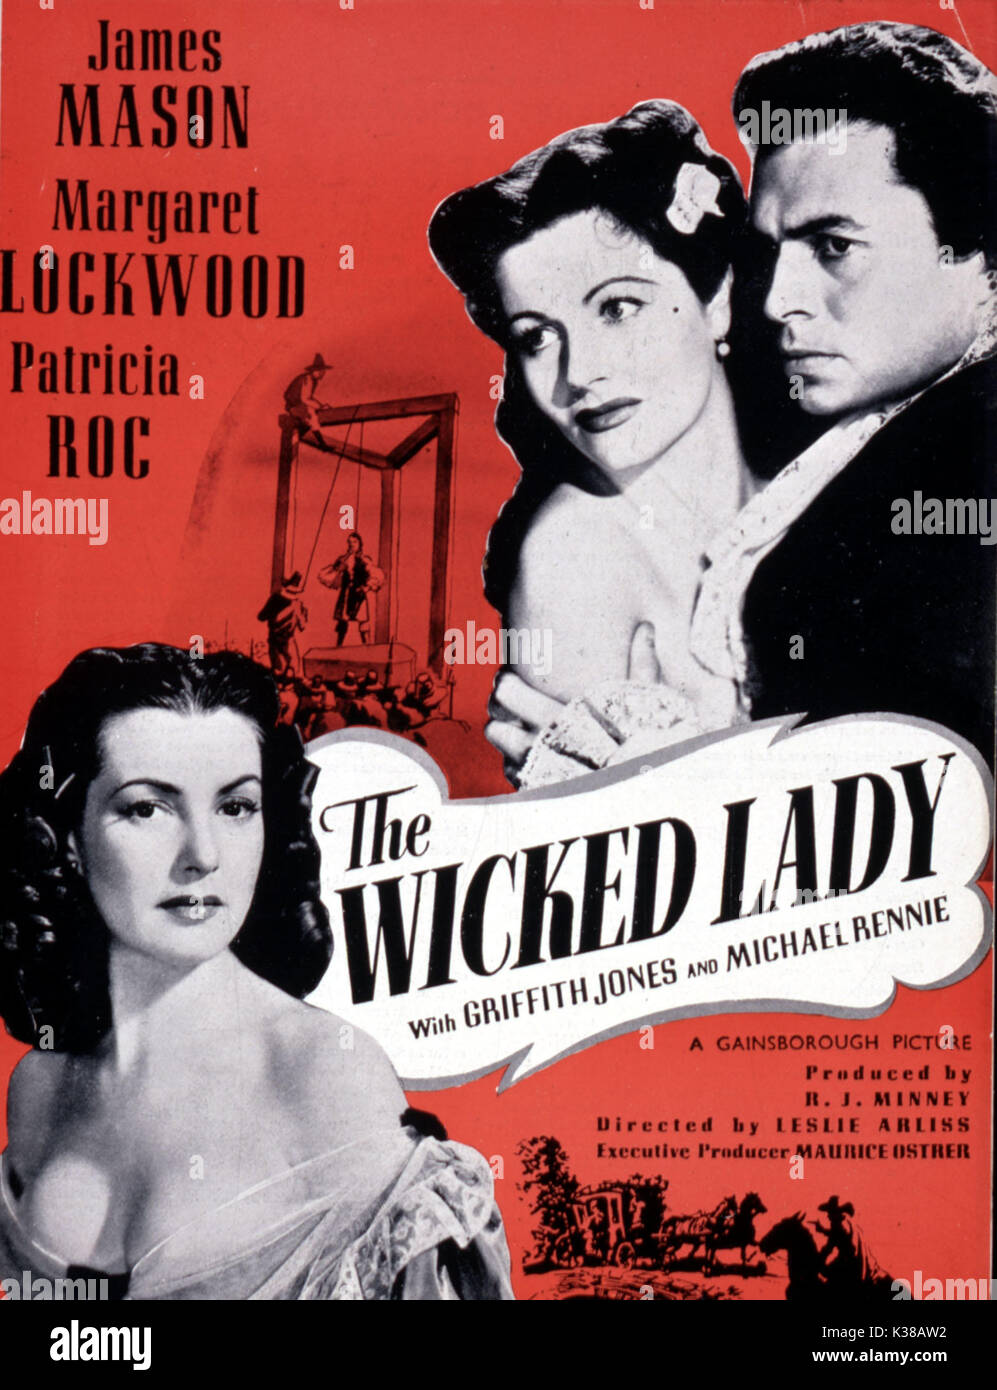 THE WICKED LADY GAINSBOROUGH PICTURES/J ARTHUR RANK FILMS MARGARET LOCKWOOD, PATRICIA ROC, JAMES MASON     Date: 1945 Stock Photo